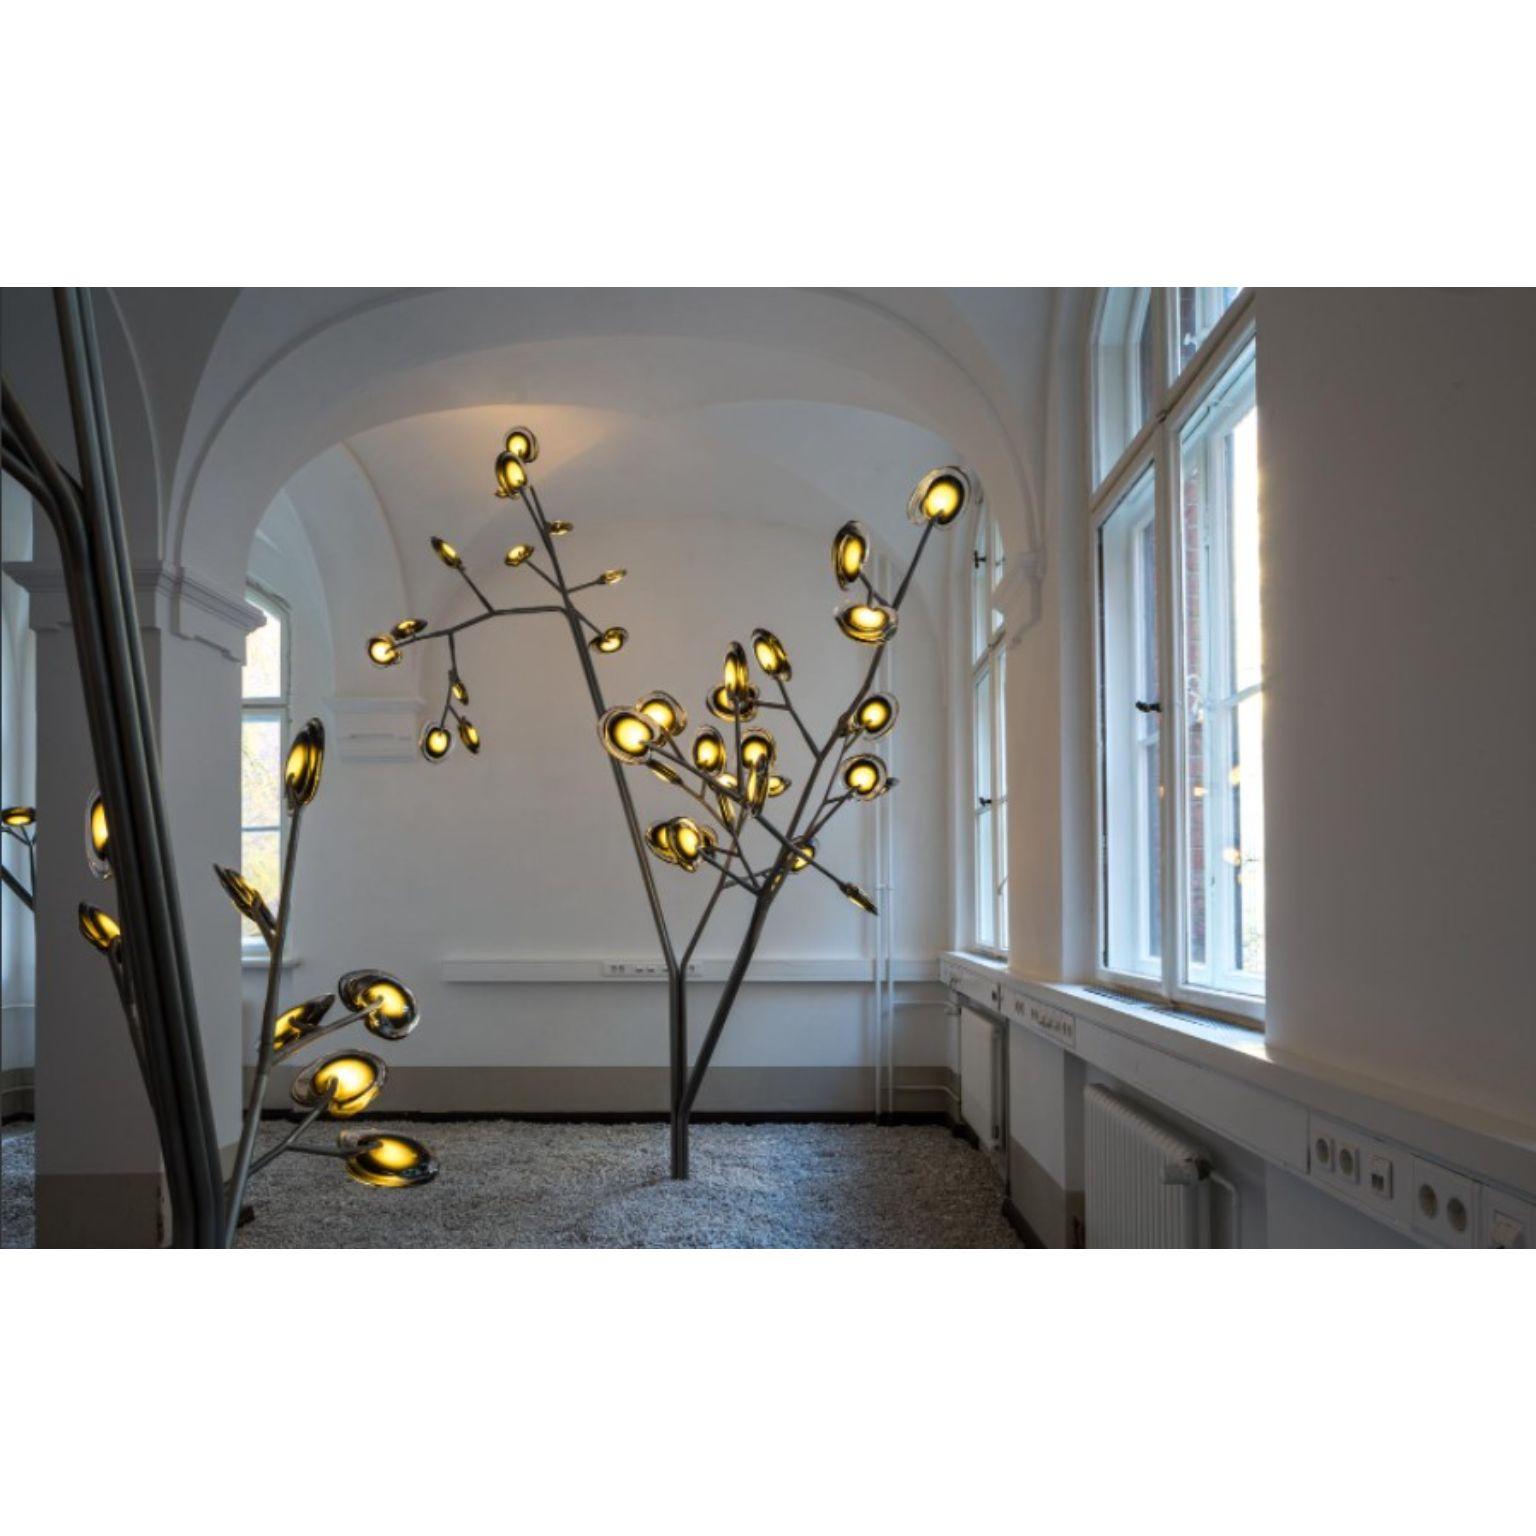 16 Tree floor lamp by Bocci
Dimensions: D400 x H710 cm
Materials: mounting plate bead-blasted stainless stee,LED
Weight: 284 kg
Available in different dimensions and in 4 different colours.

All our lamps can be wired according to each